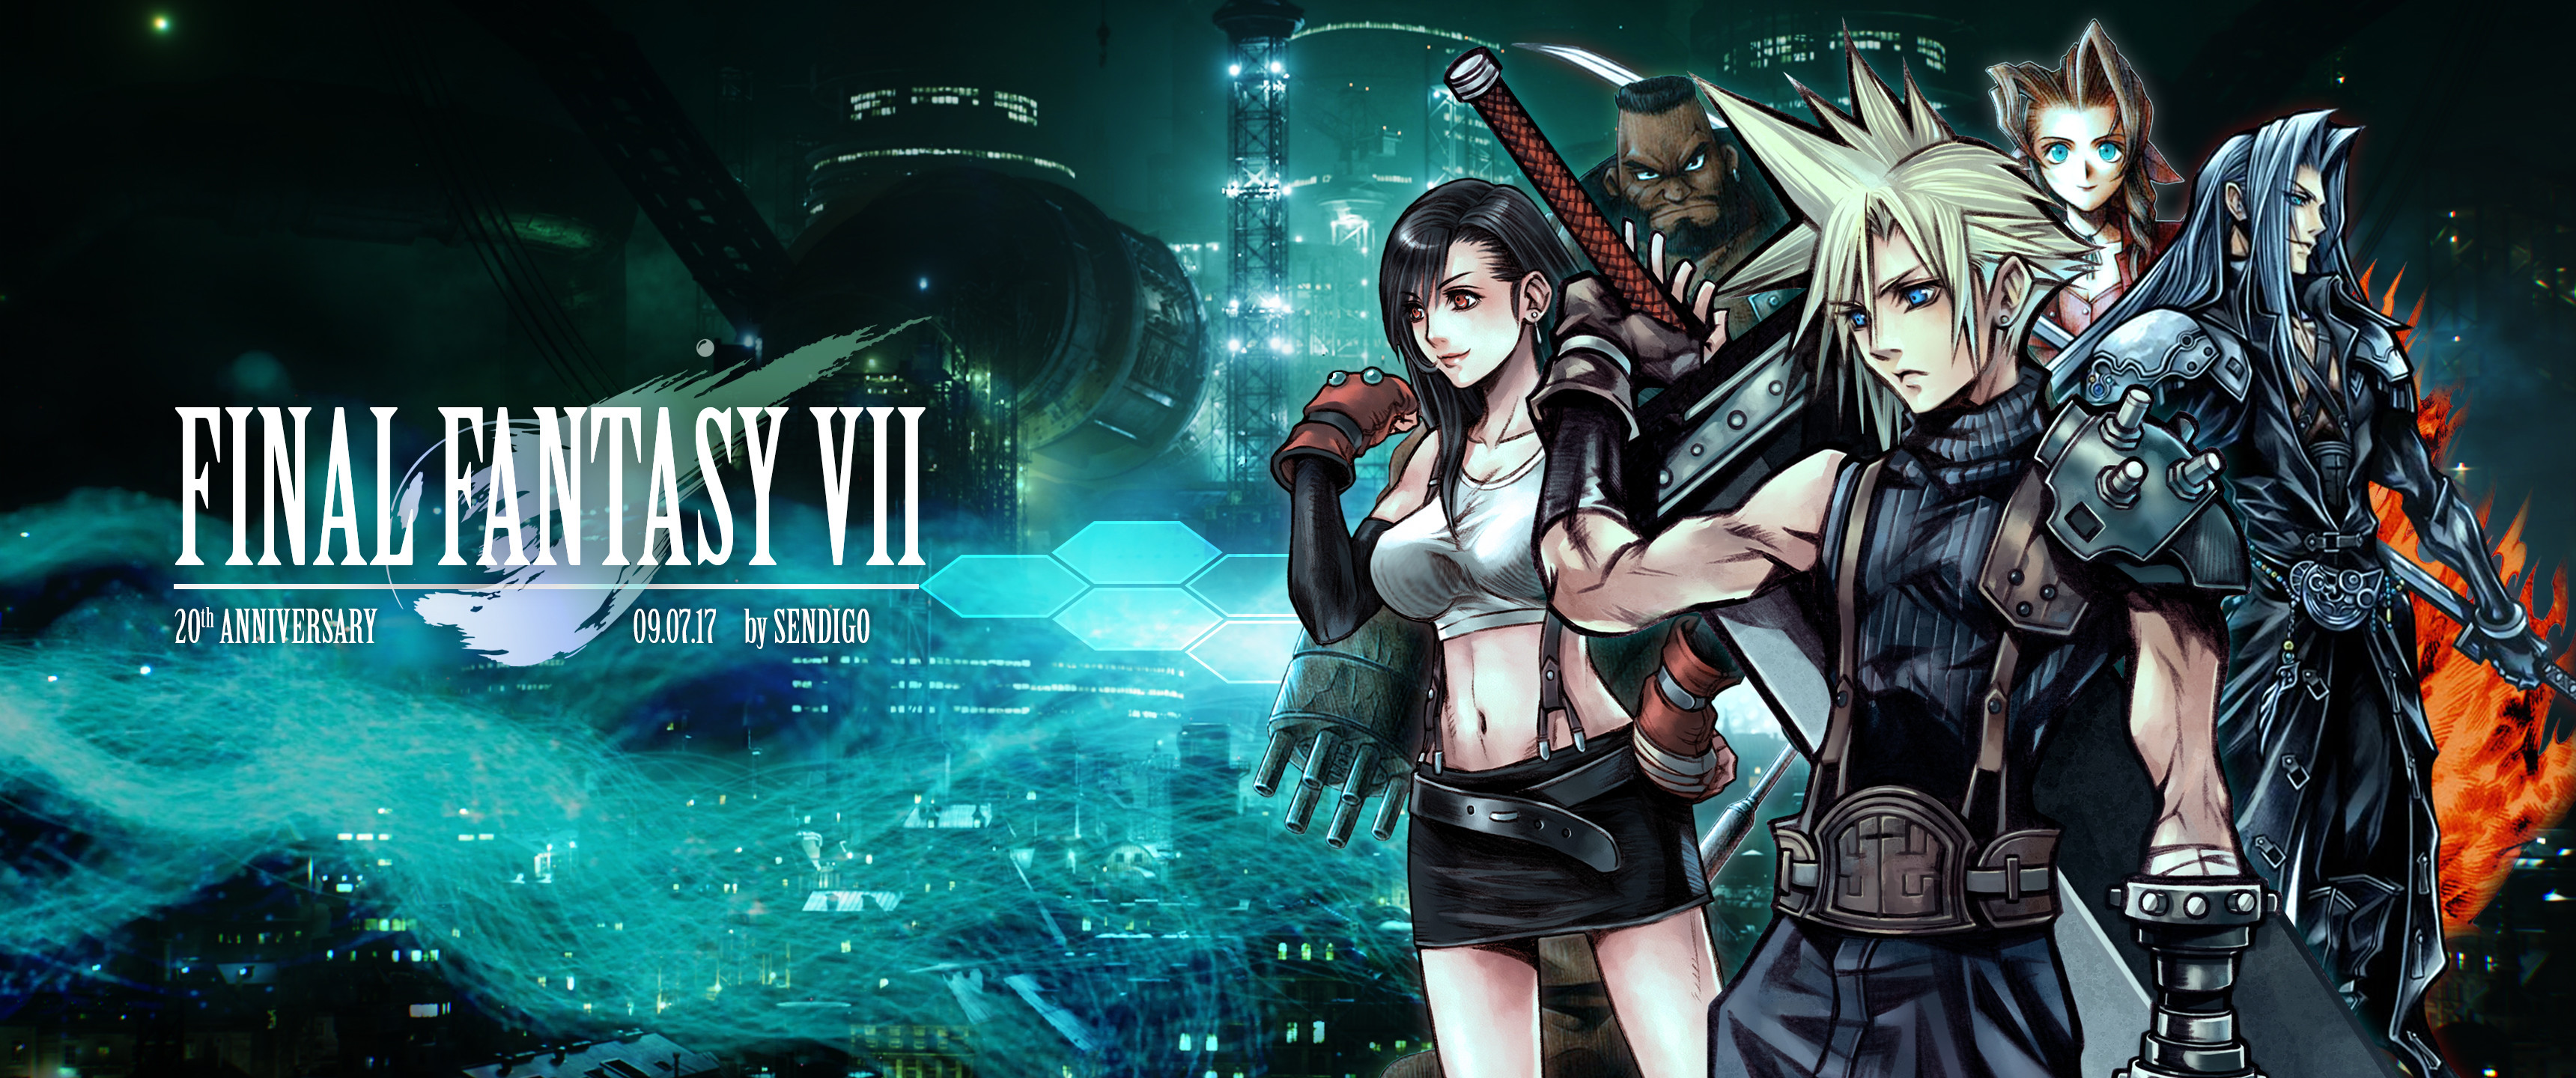 3440x1440 Final Fantasy Vii Wallpapers